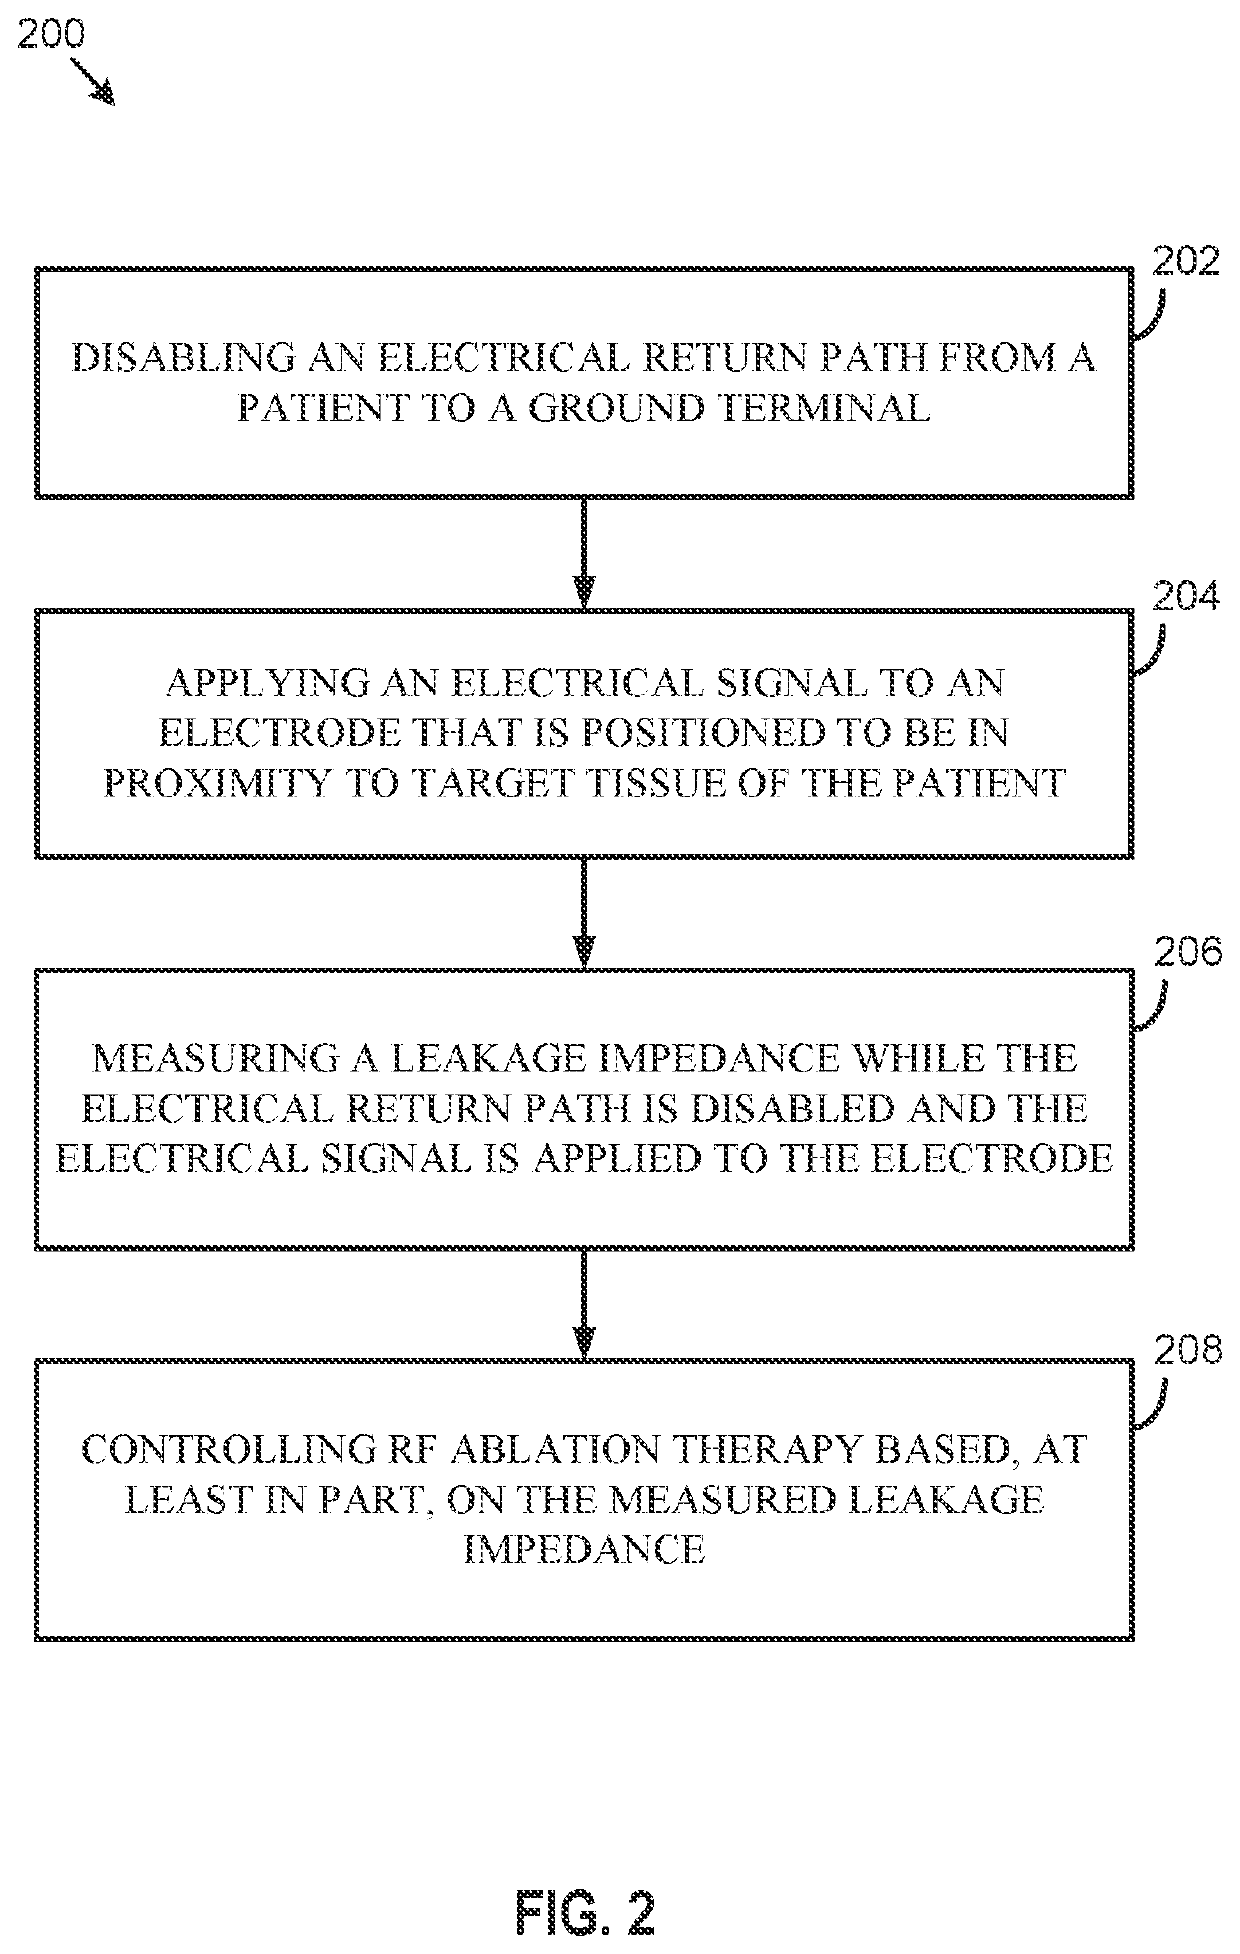 Systems and methods for detecting leakage currents in high-frequency ablation systems